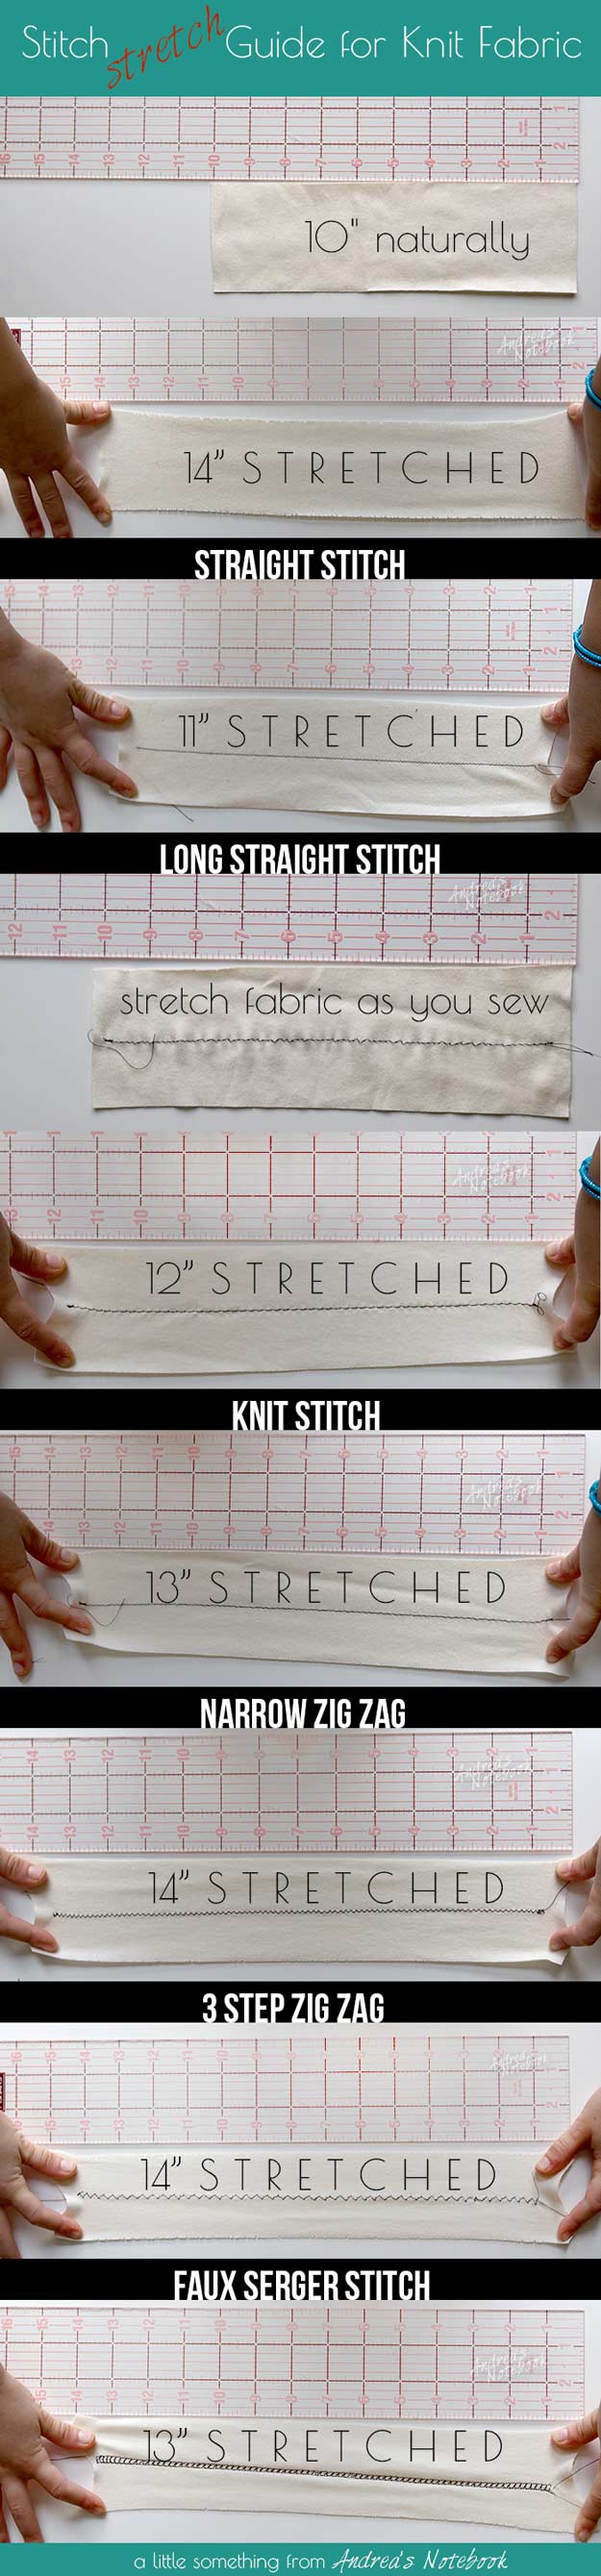 Sewing Hacks | Best Tips and Tricks for Sewing Patterns, Projects, Machines, Hand Sewn Items. Clever Ideas for Beginners and Even Experts | Use a Sewing Machine to Sew Knit Fabric 